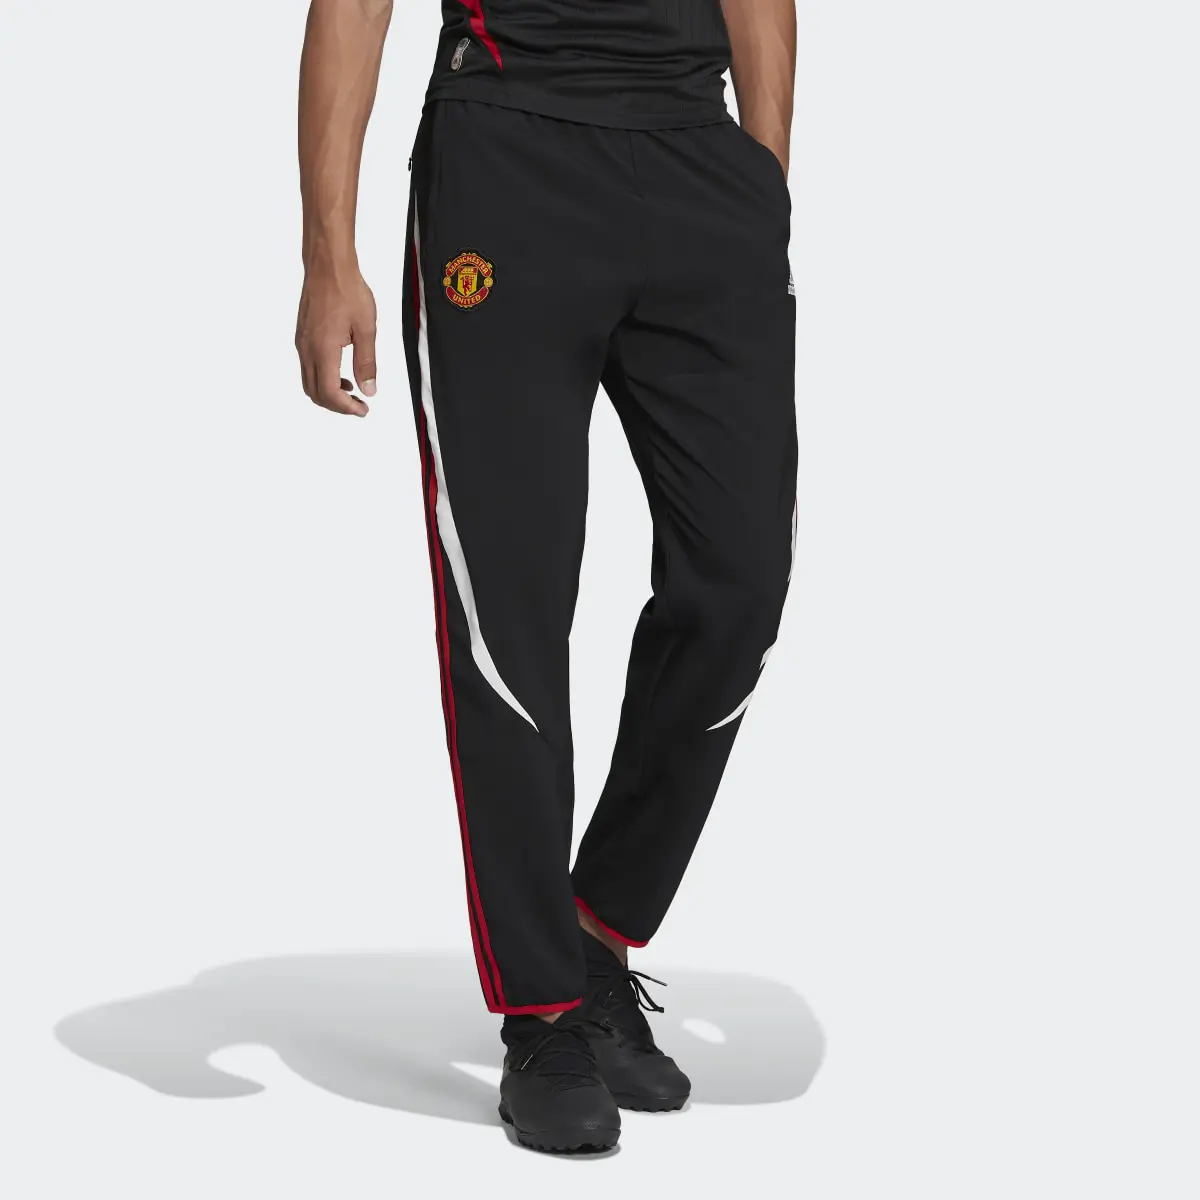 Adidas Manchester United Teamgeist Woven Pants. 1